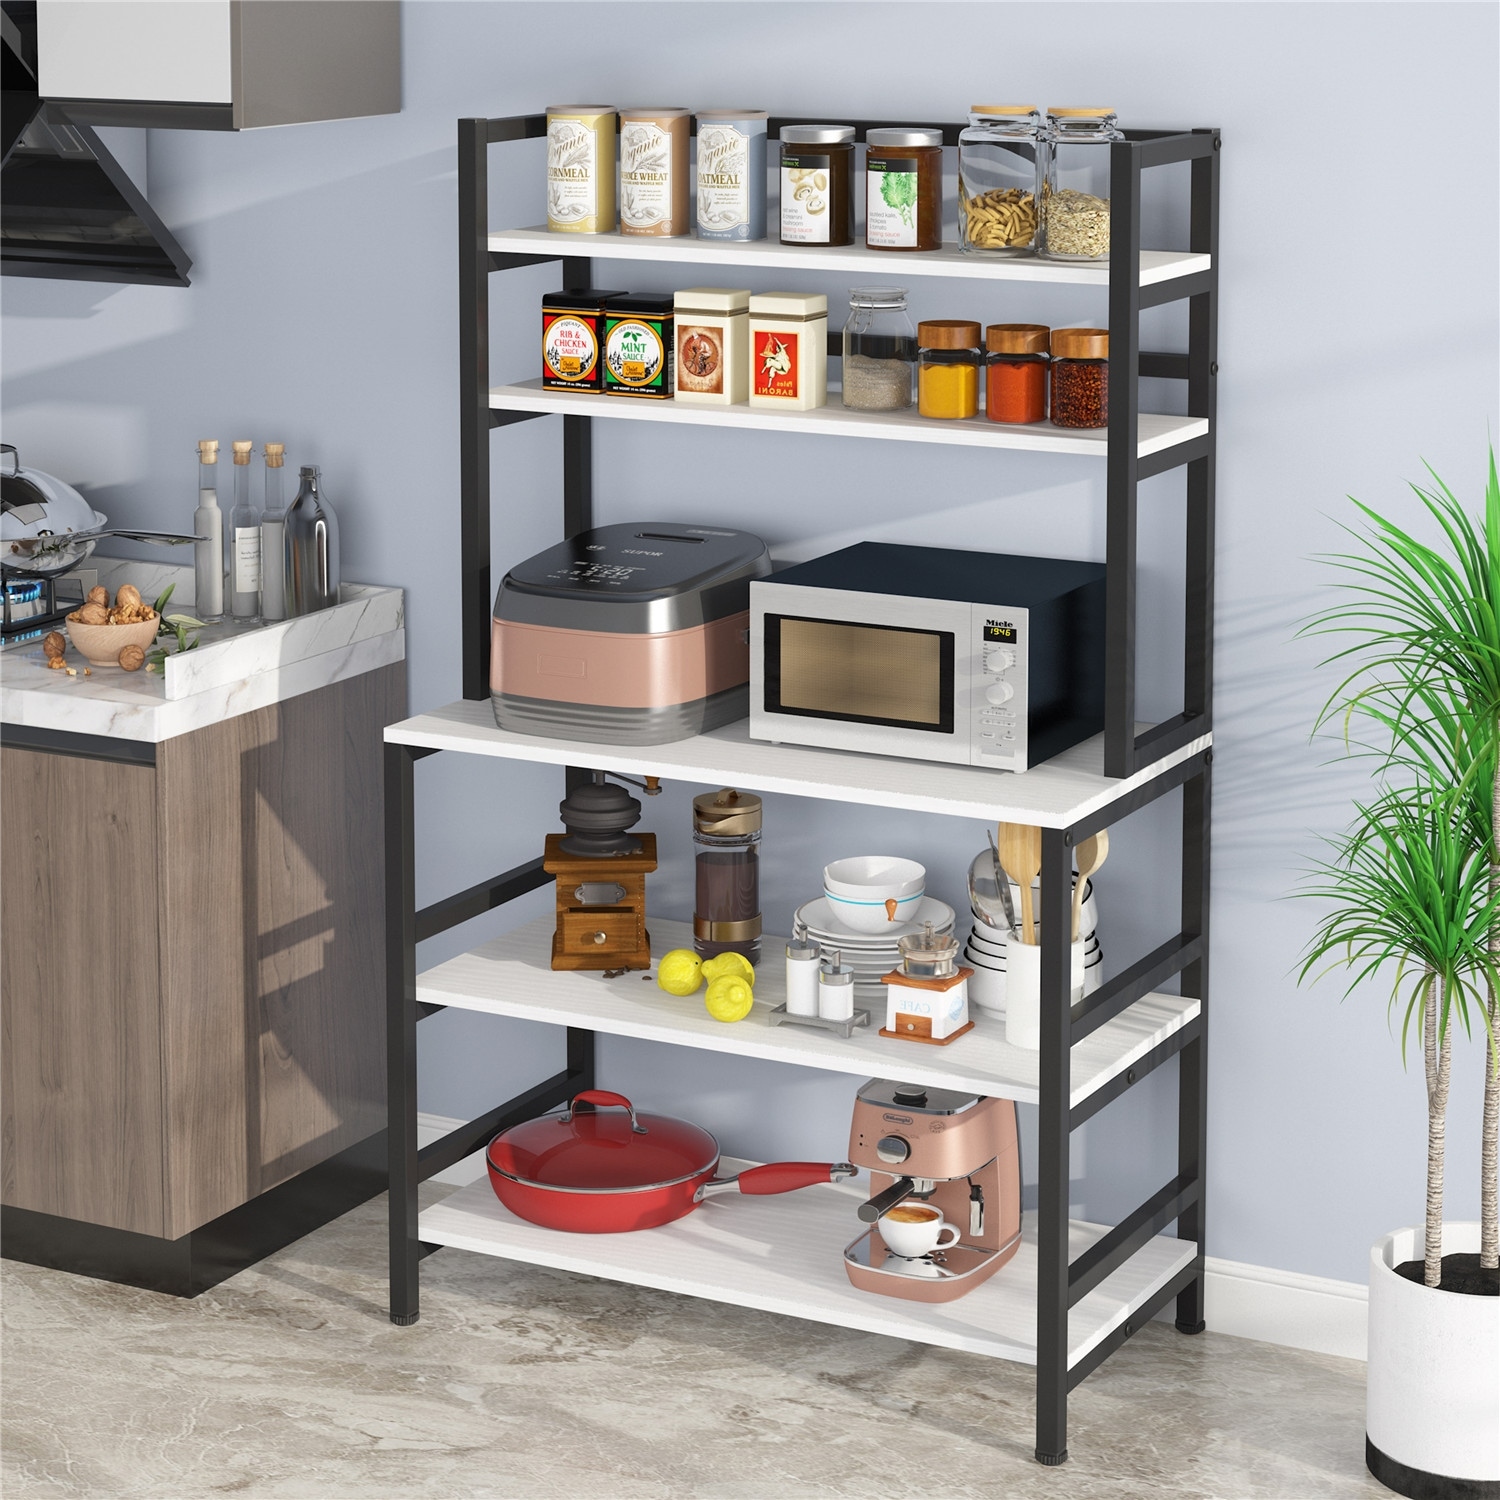 https://ak1.ostkcdn.com/images/products/is/images/direct/49593dccbeac76366e8e78602f8323cca2156e7c/5-Tier-Industrial-Kitchen-Baker%27s-Rack-Microwave-Stand-Utility.jpg